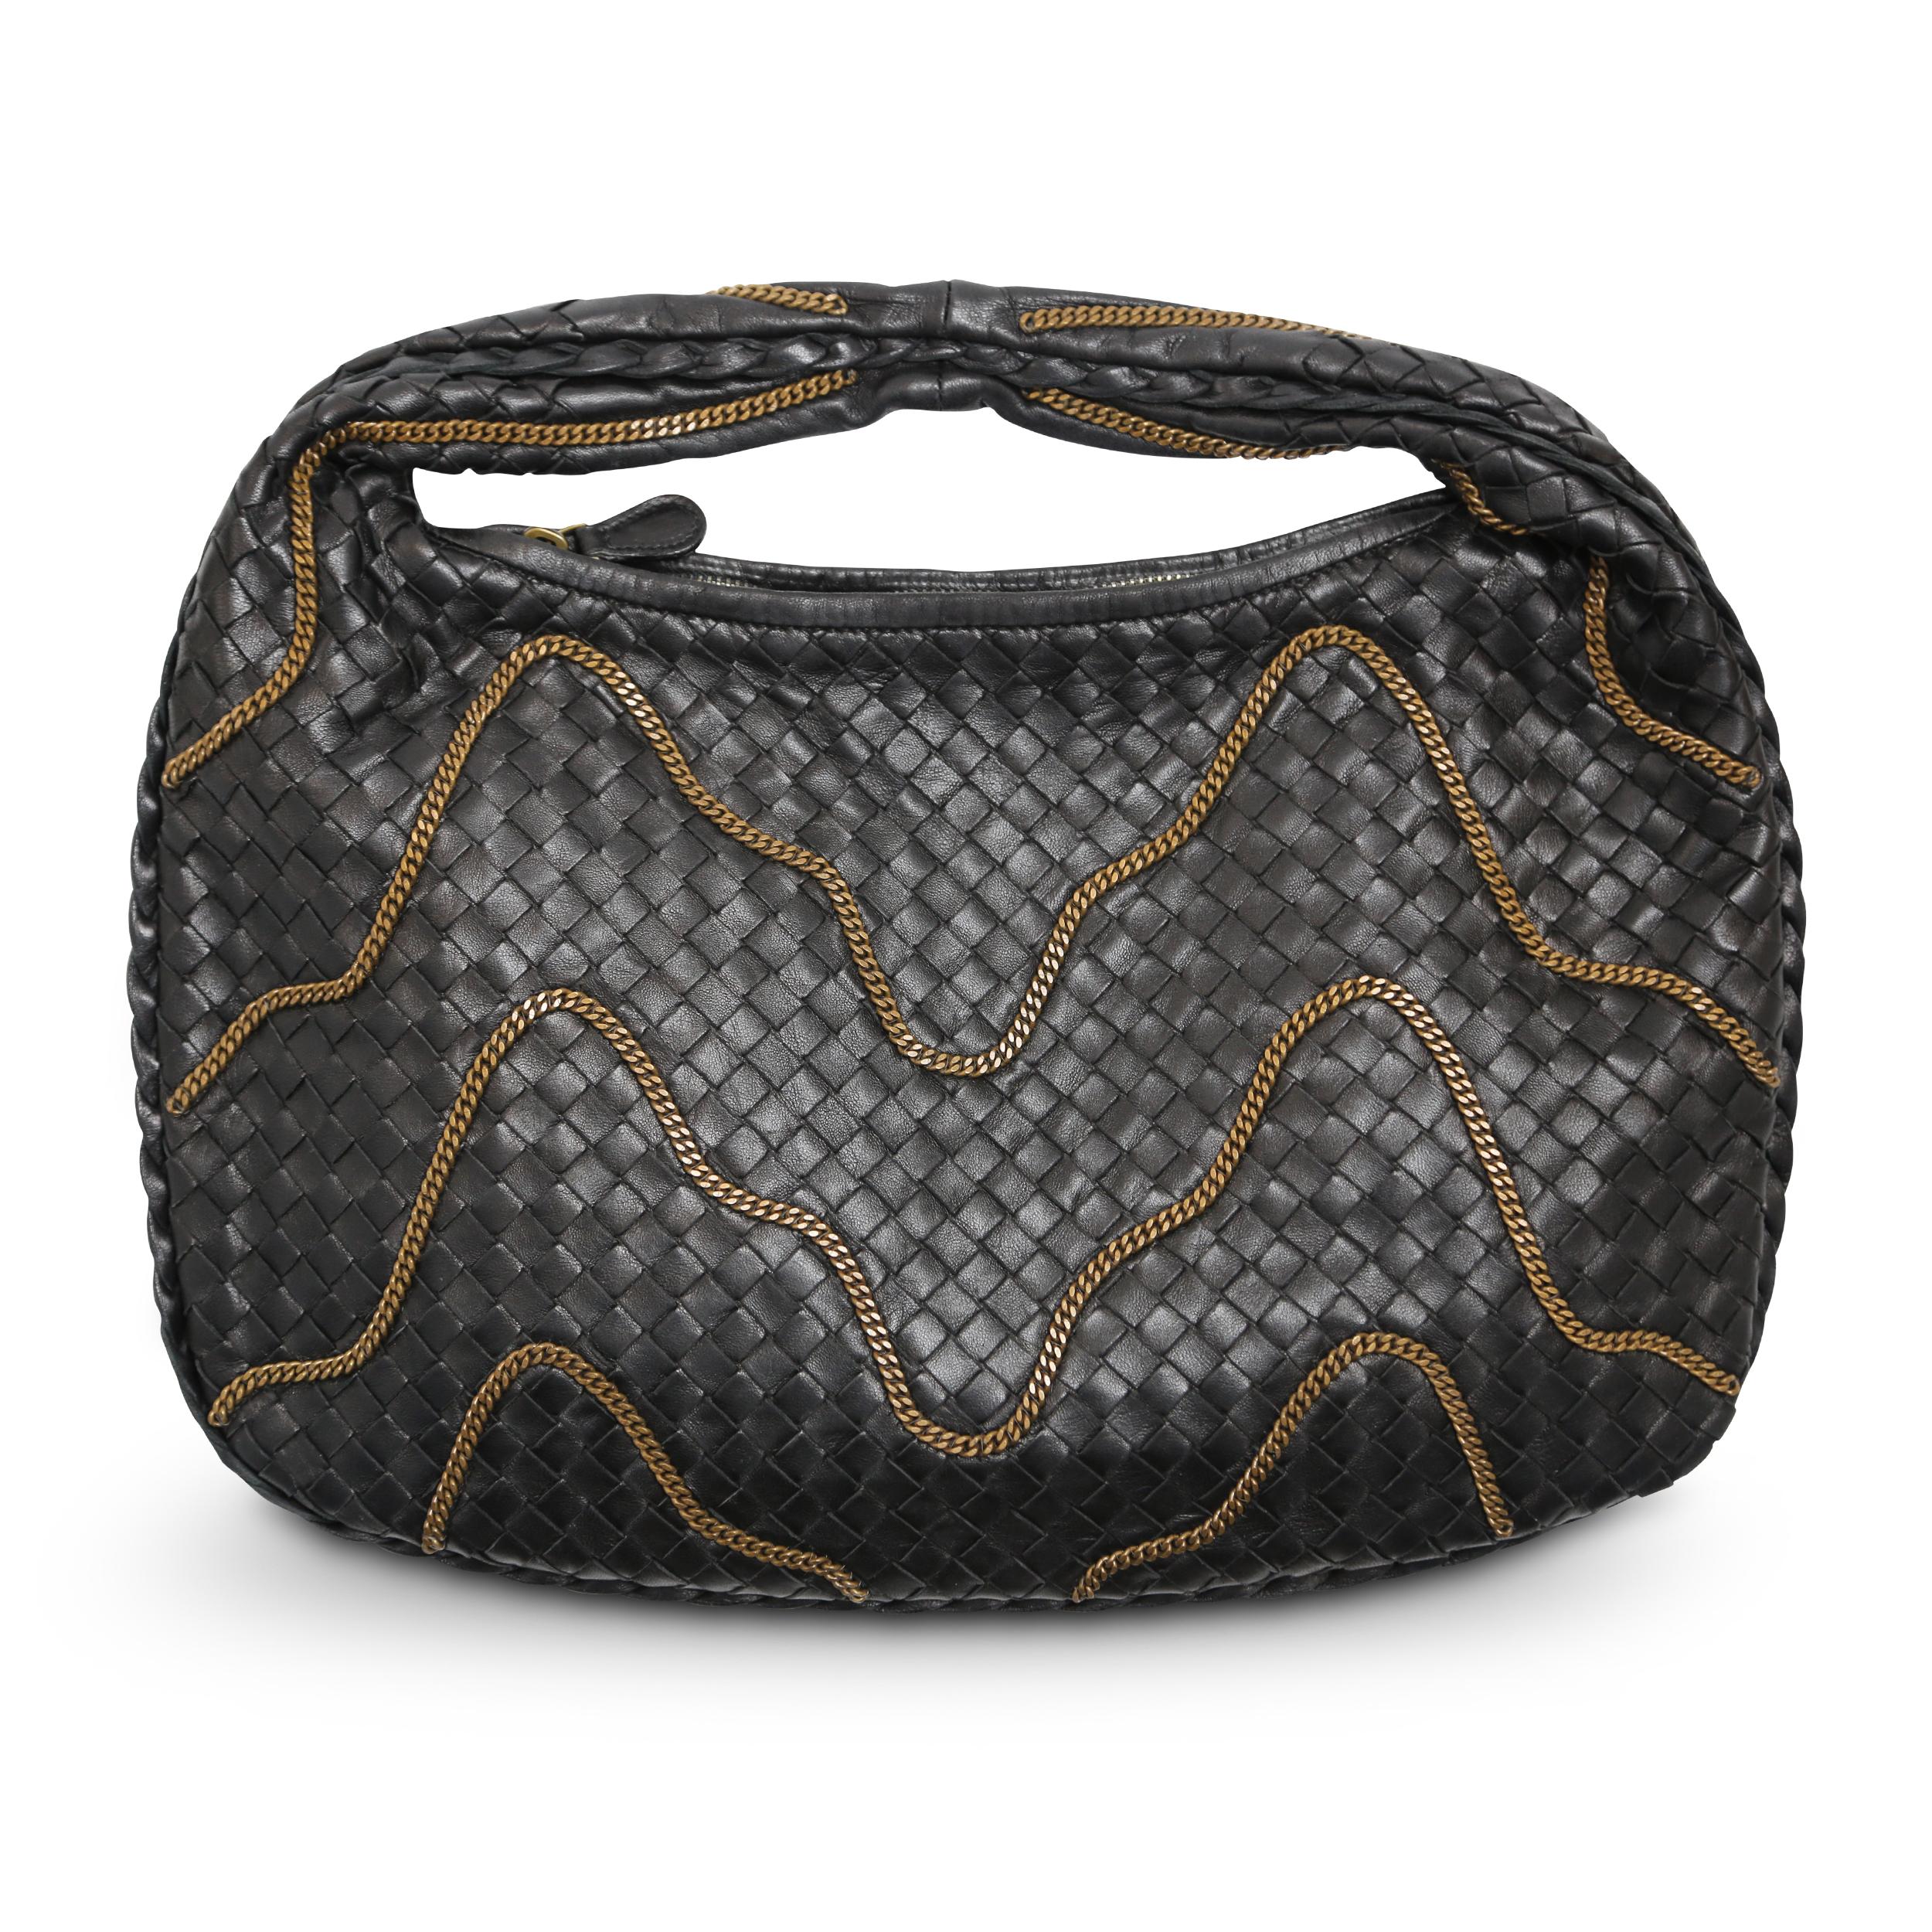 Experience modern luxury with Bottega Veneta's Signature Intrecciato Woven Leather Bag. Crafted in classic dark brown and adorned with antique brass wavy chain embroidery, this bag is a timeless statement piece. Please kindly note that this bag has